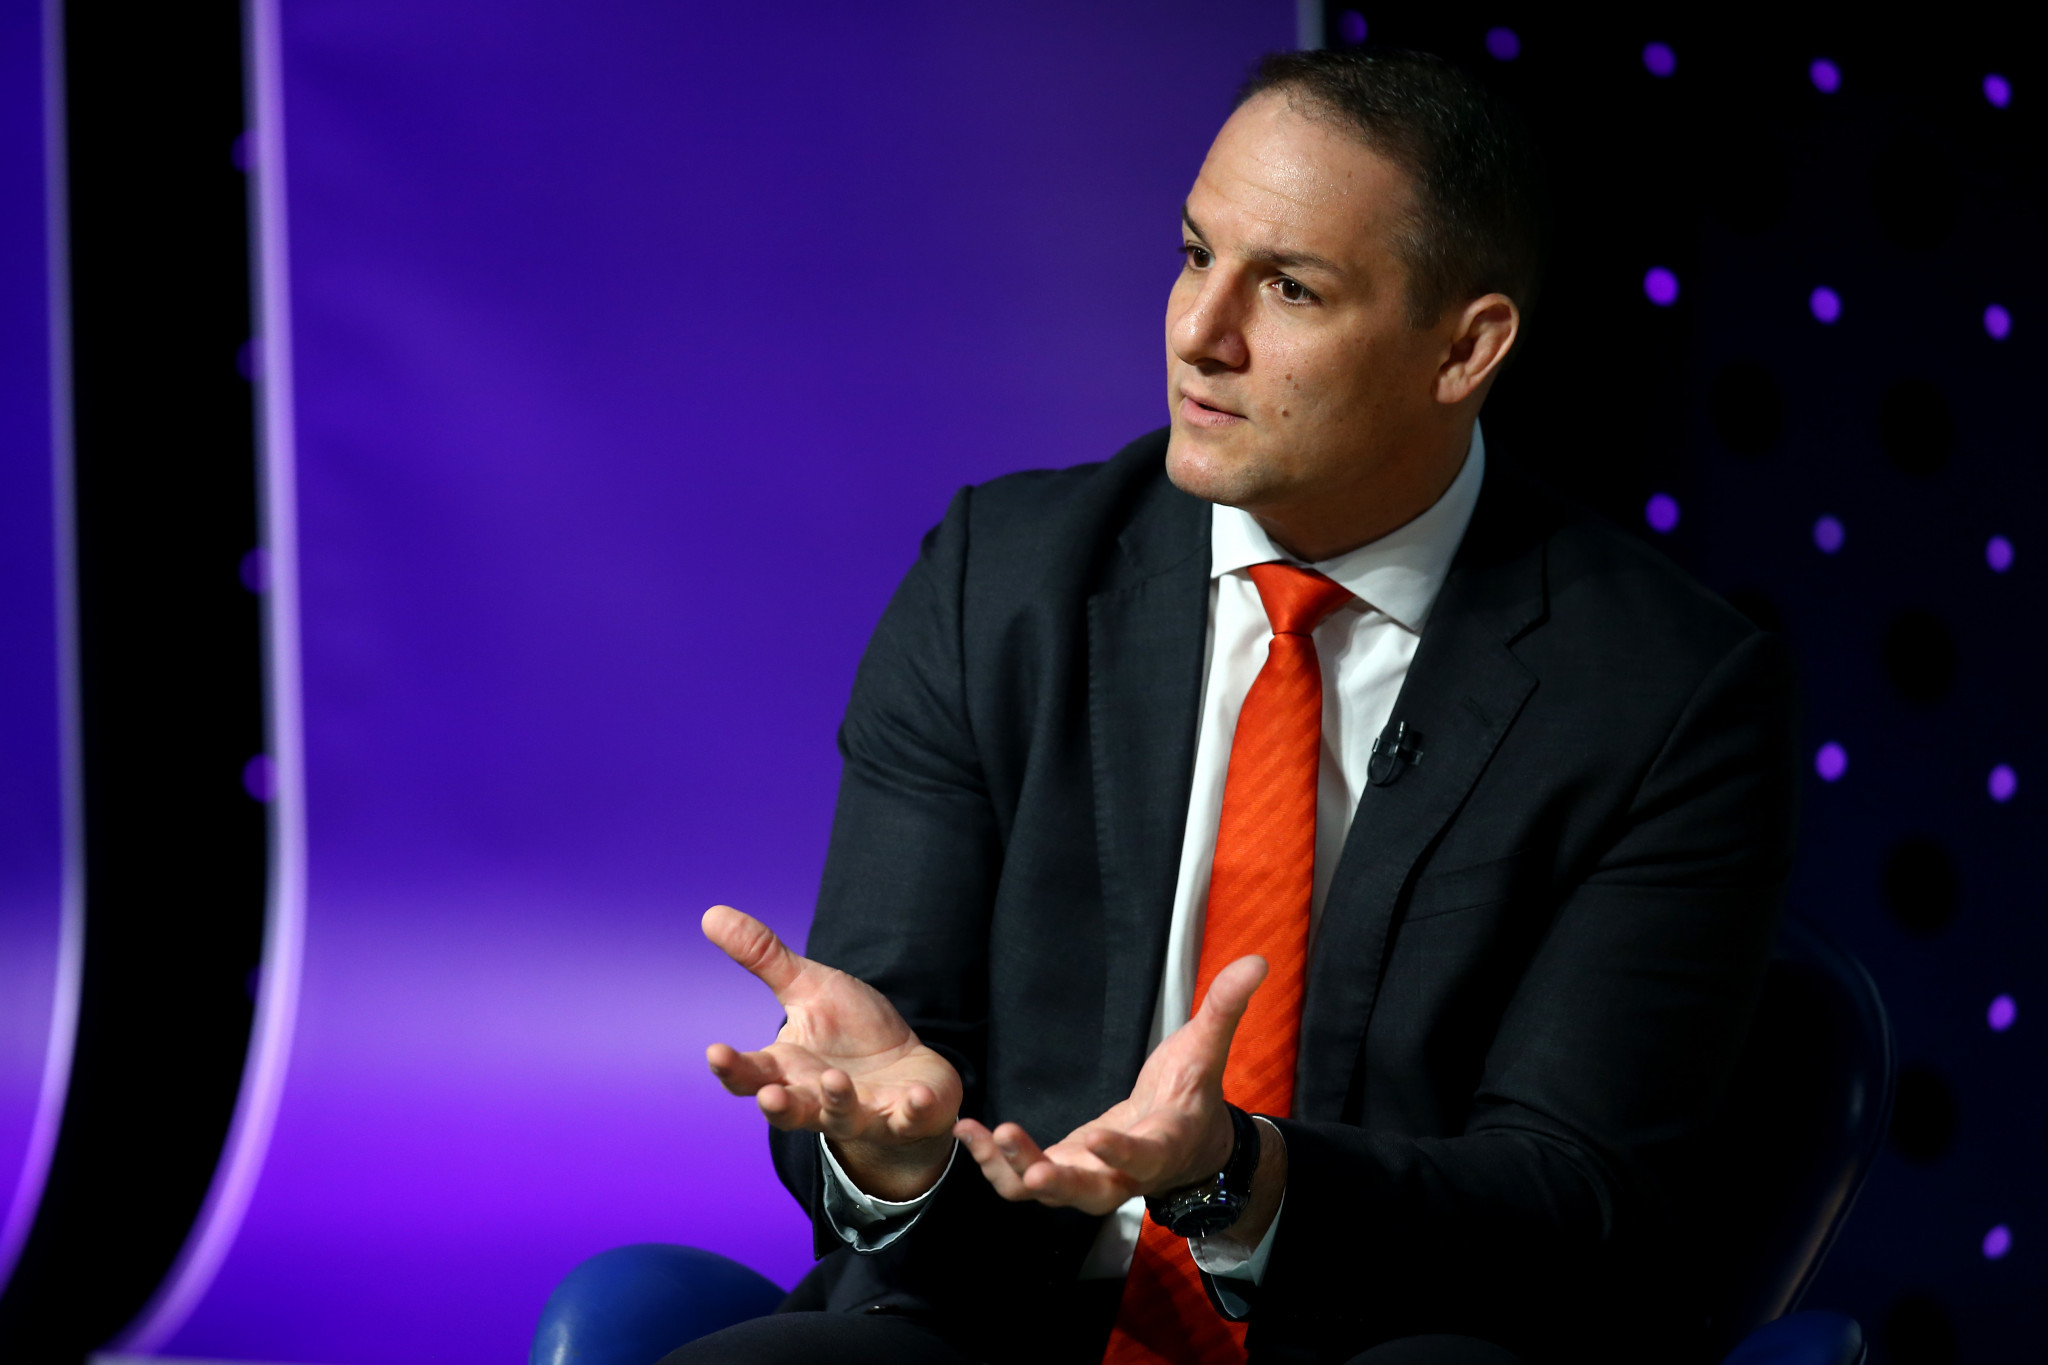 Grevemberg joins Centre for Sport and Human Rights in new role